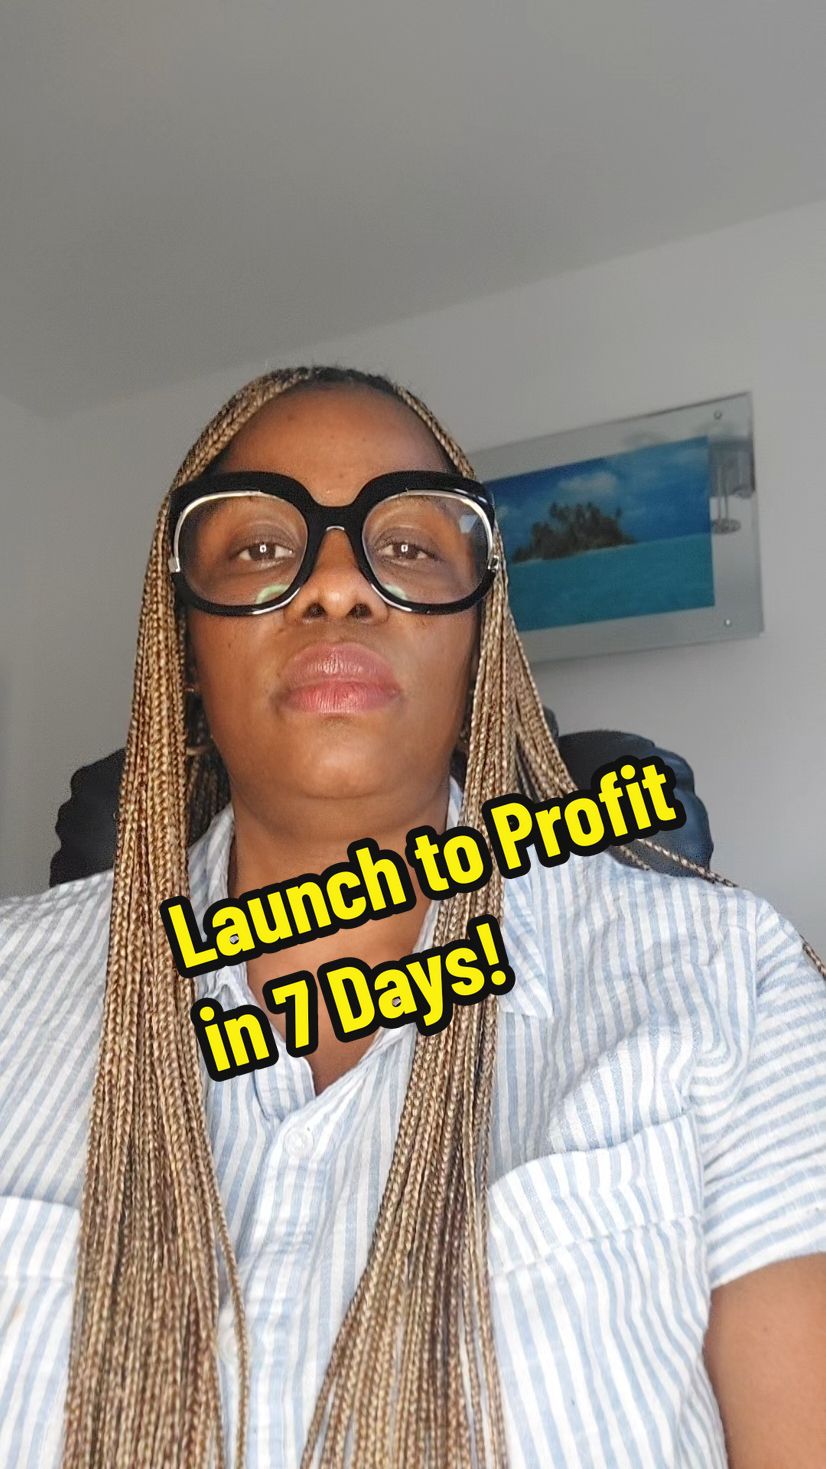 The Legacy Builders Programme can sure make you a million dollars. Through 3 opportunities within it. We have a E-Learning platform , Launch to profit in 7 days and .... Follow me for the third #mum  #earnonline #legacybuilders #digitalmarketing 